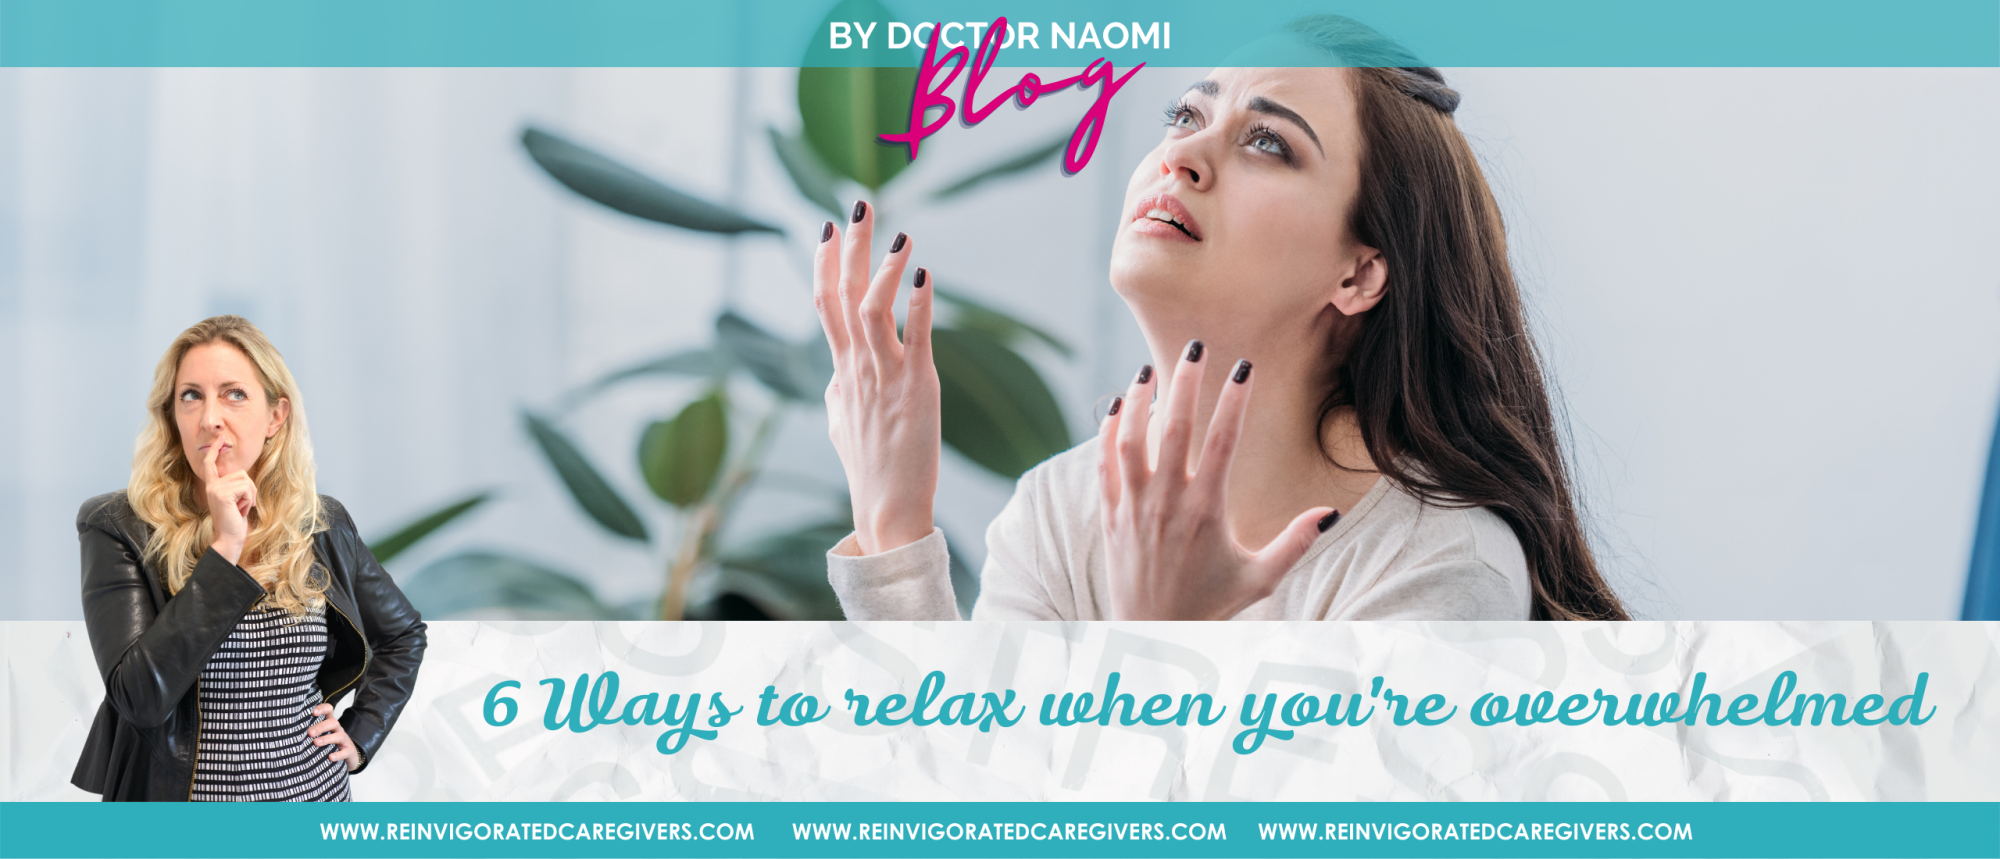 6 ways to relax when you're overwhelmed